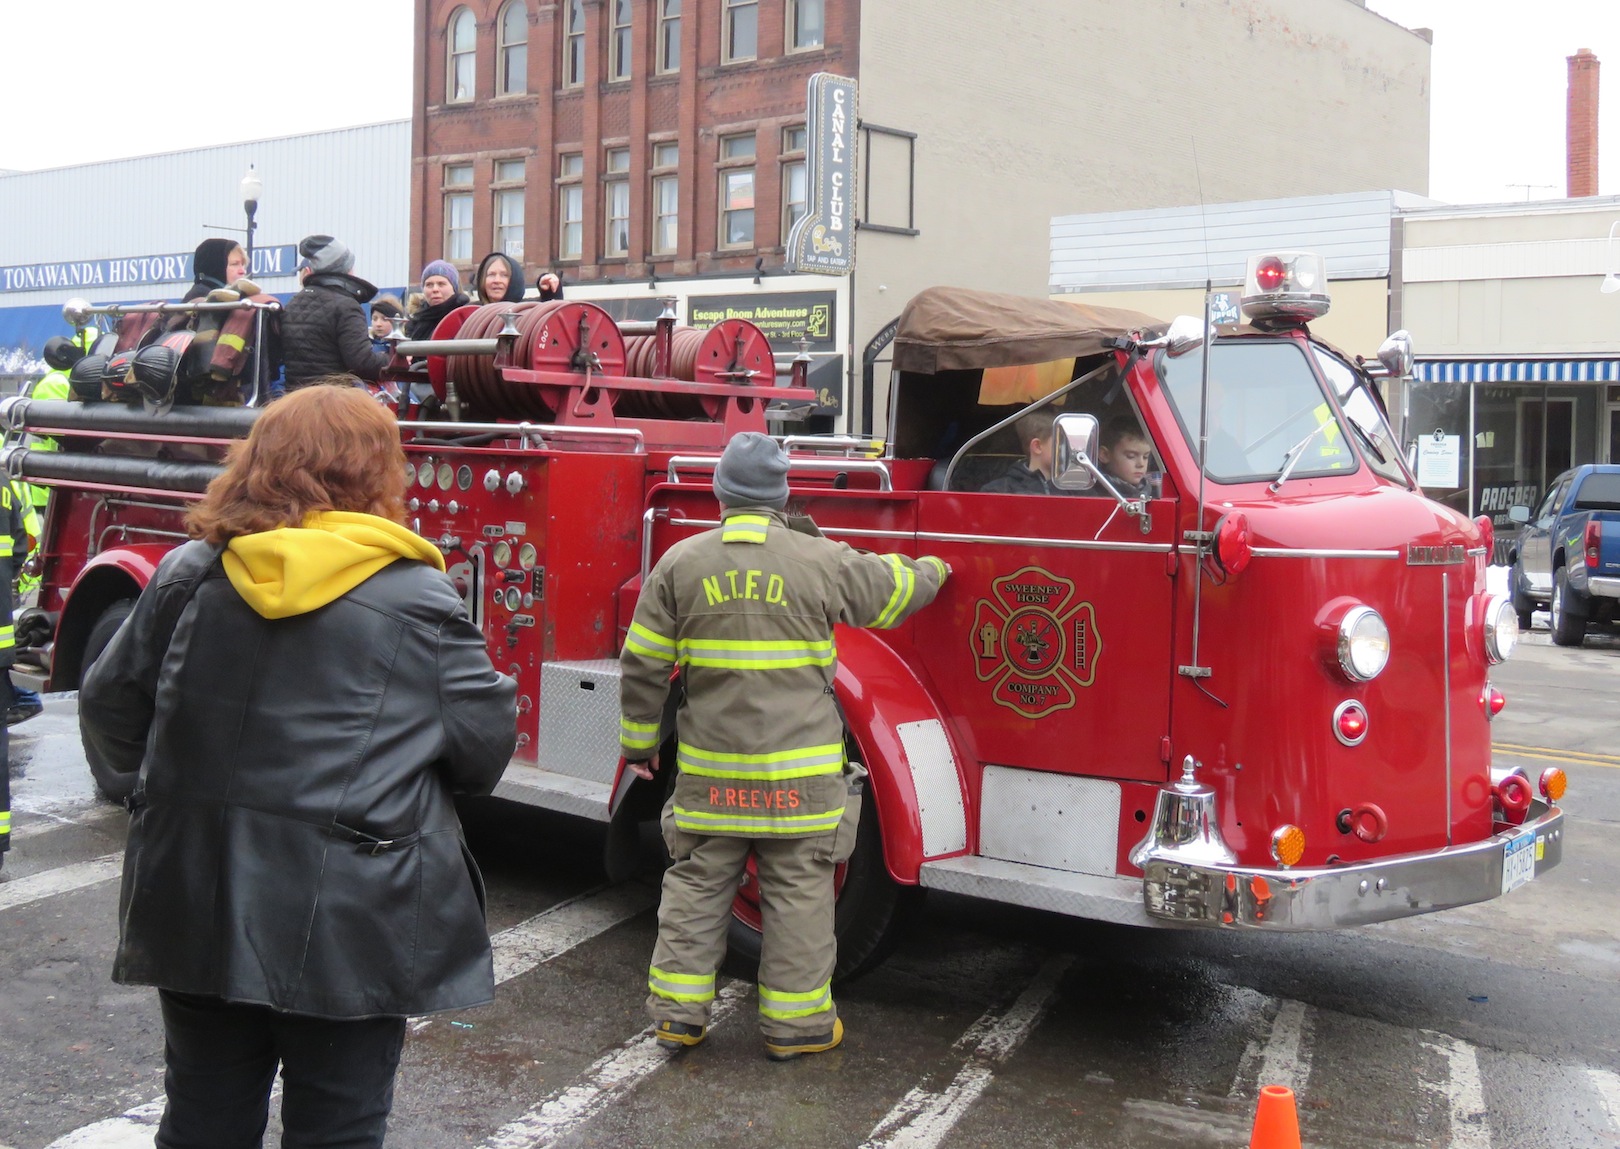 Children get ready to ride the classic North Tonawanda Fire Department truck. The truck made a short journey down Webster Street and around surrounding streets before making its way back in front of the Riviera Theatre. (Photos by David Yarger)